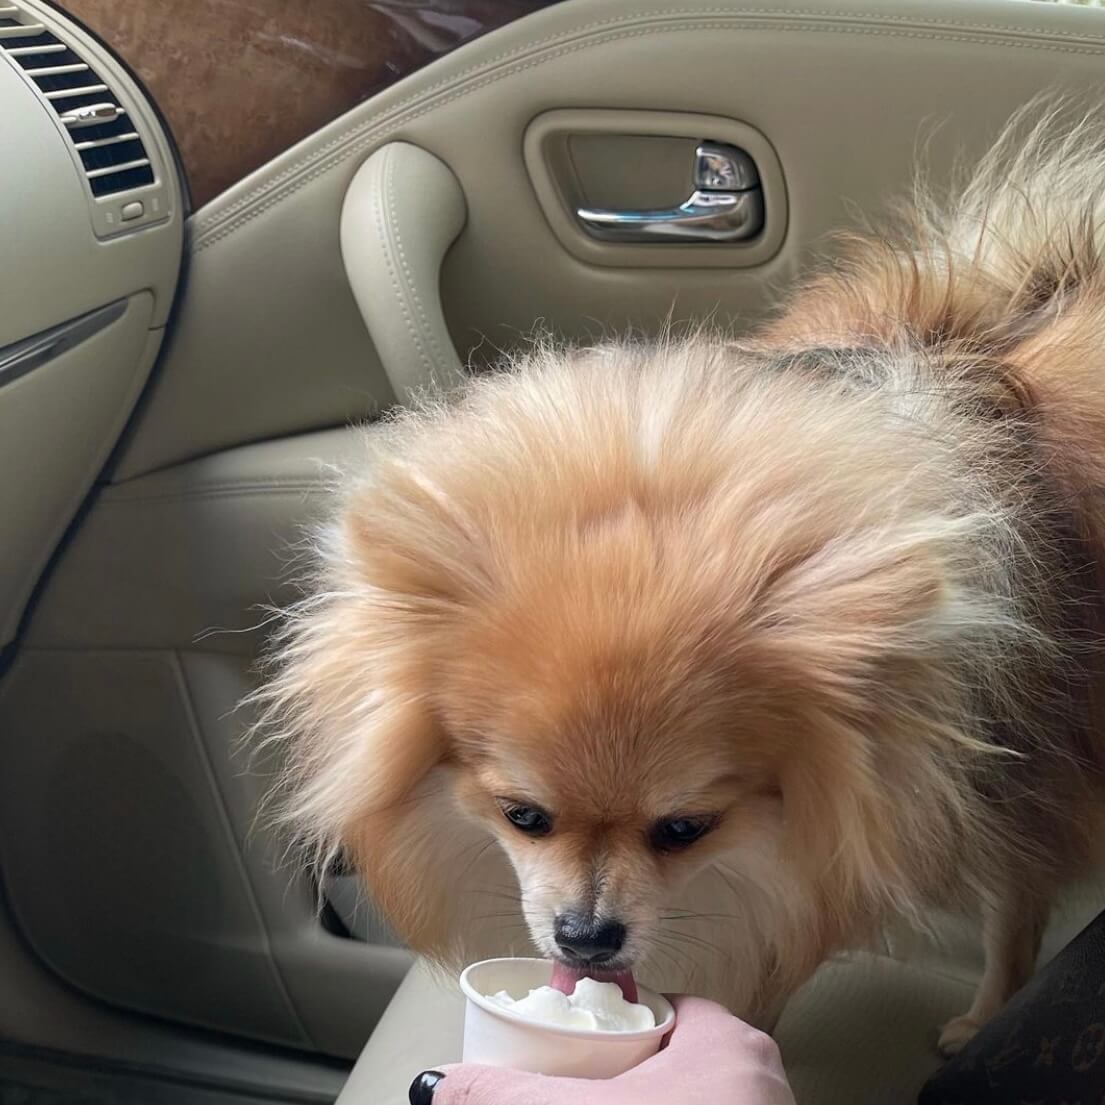 Dog in car licking whipped cream from a pup cup